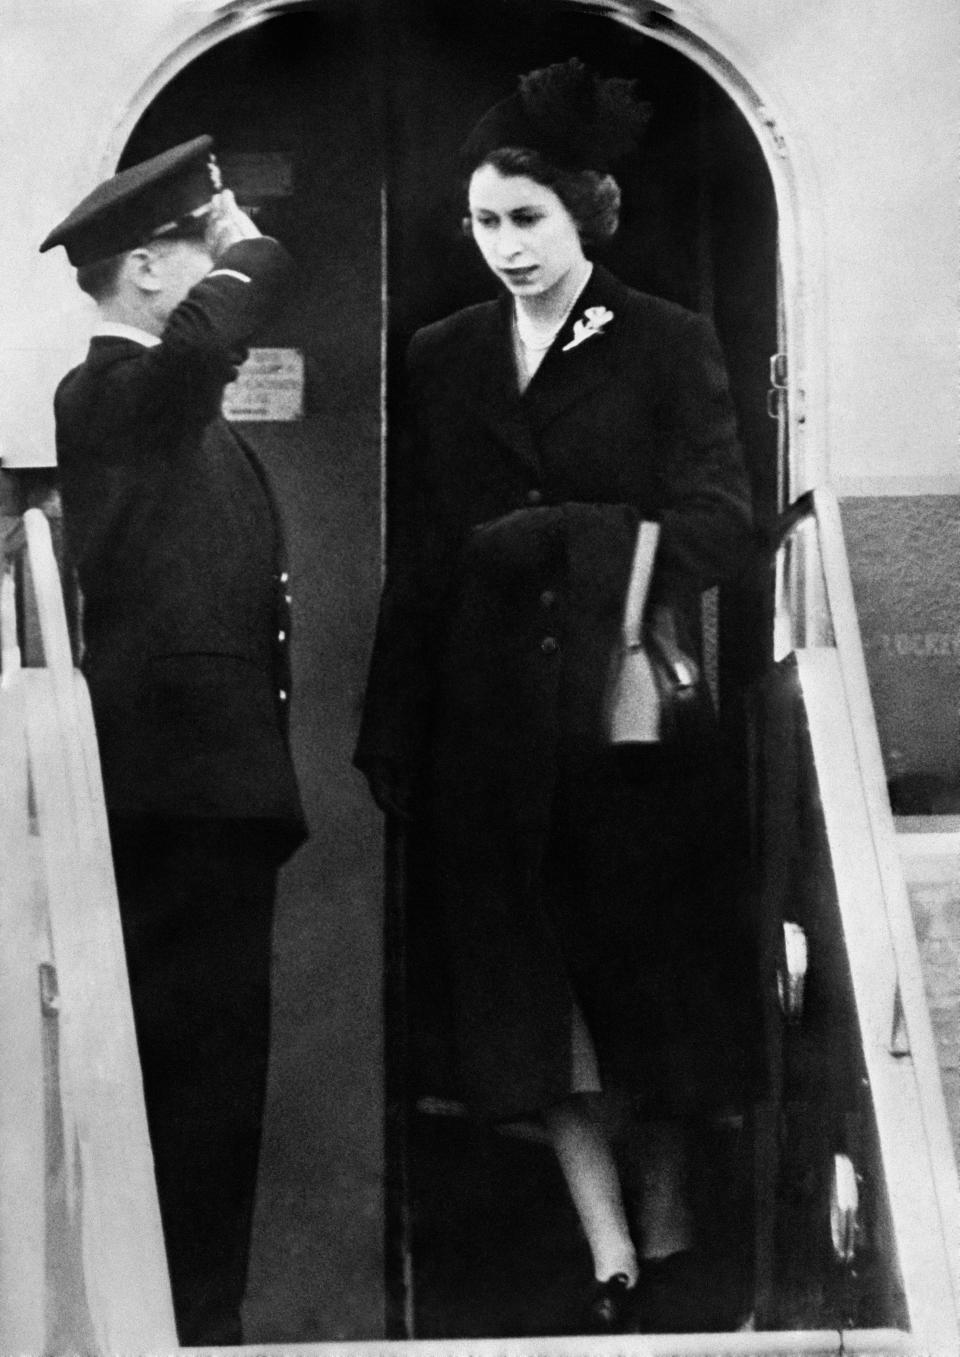 Dressed in black Queen Elizabeth II sets foot on British soil for the first time since her accession as she lands at London Airport after her day and night flight from Kenya following the death of her father, King George VI.   (Photo by PA Images via Getty Images)